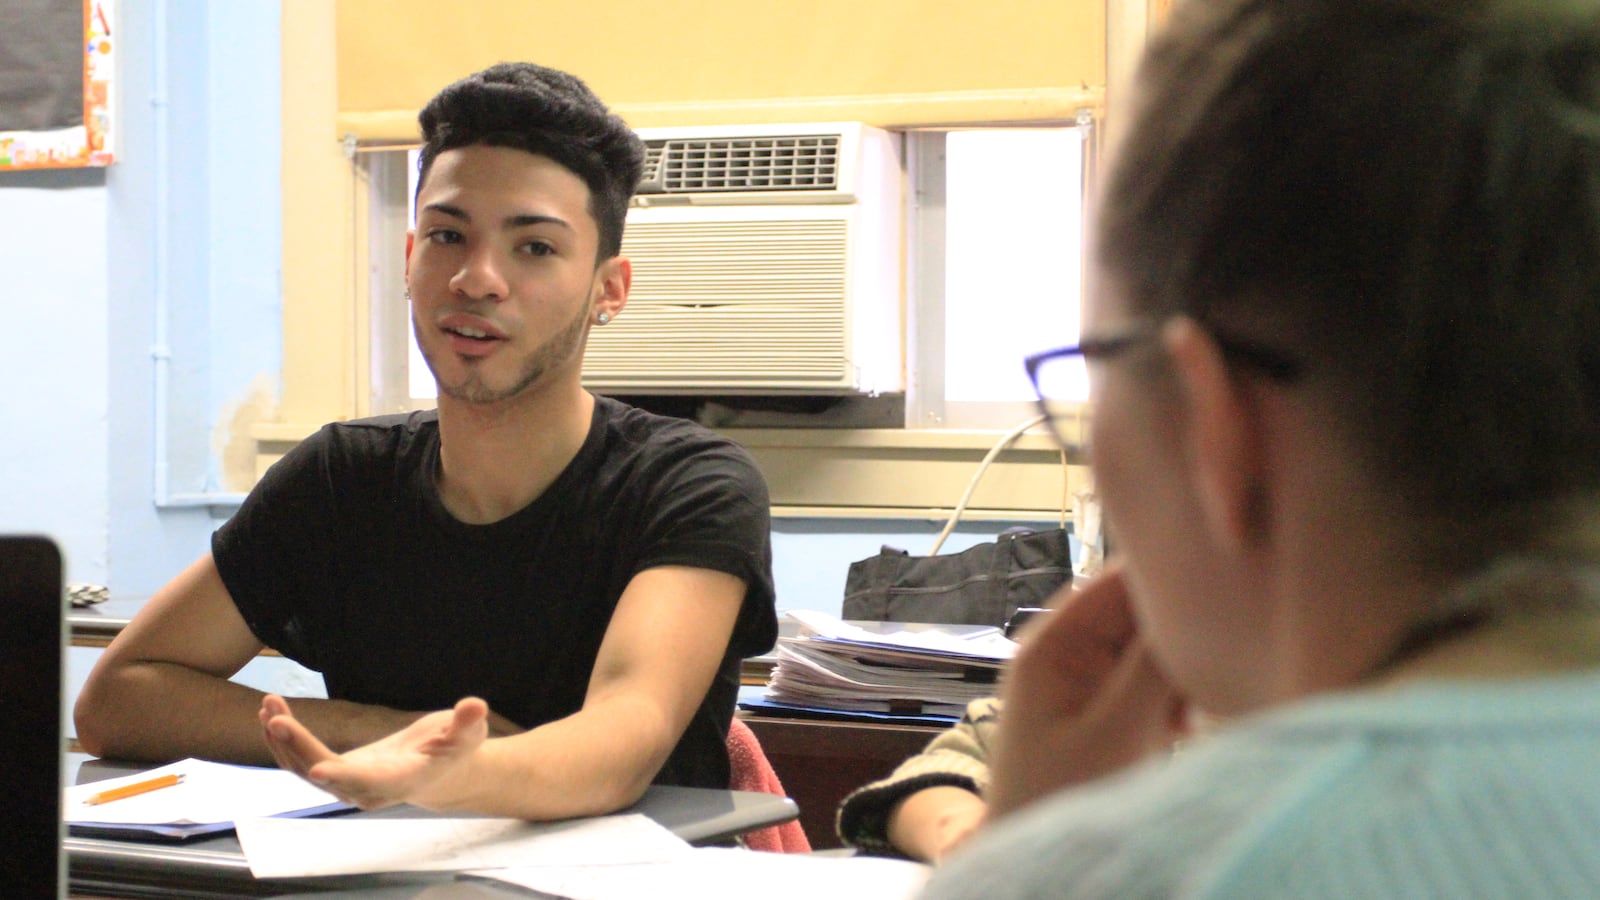 Fordham High School for the Arts junior William Carrasquillo, 16, talks about summer job and internship opportunities during his OneGoal class.